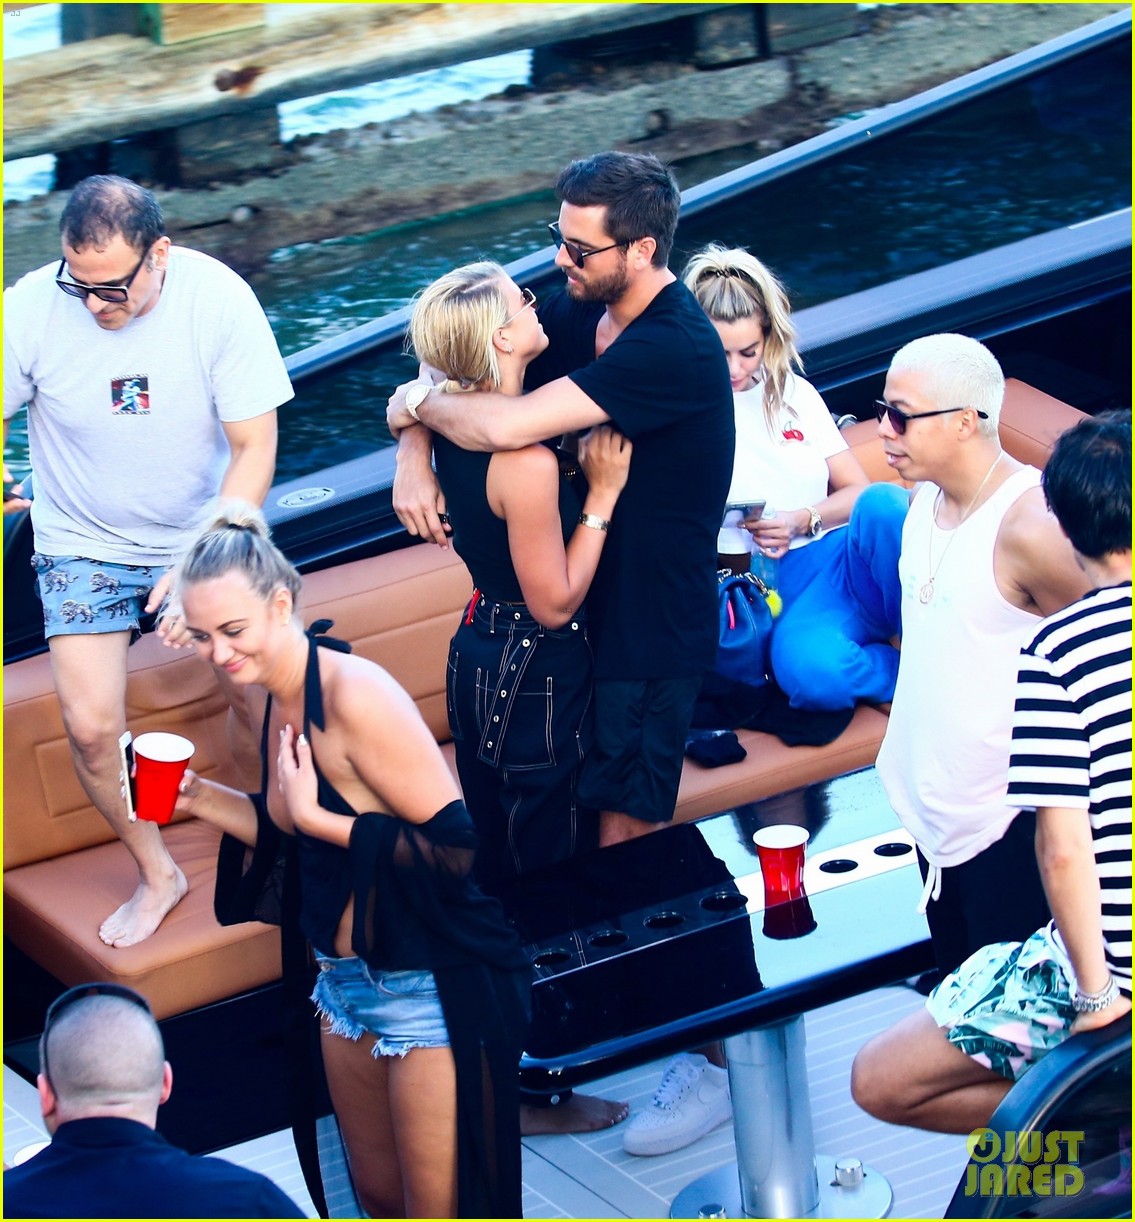 scott disick and sofia richie flaunt pda on a boat with friends2 09